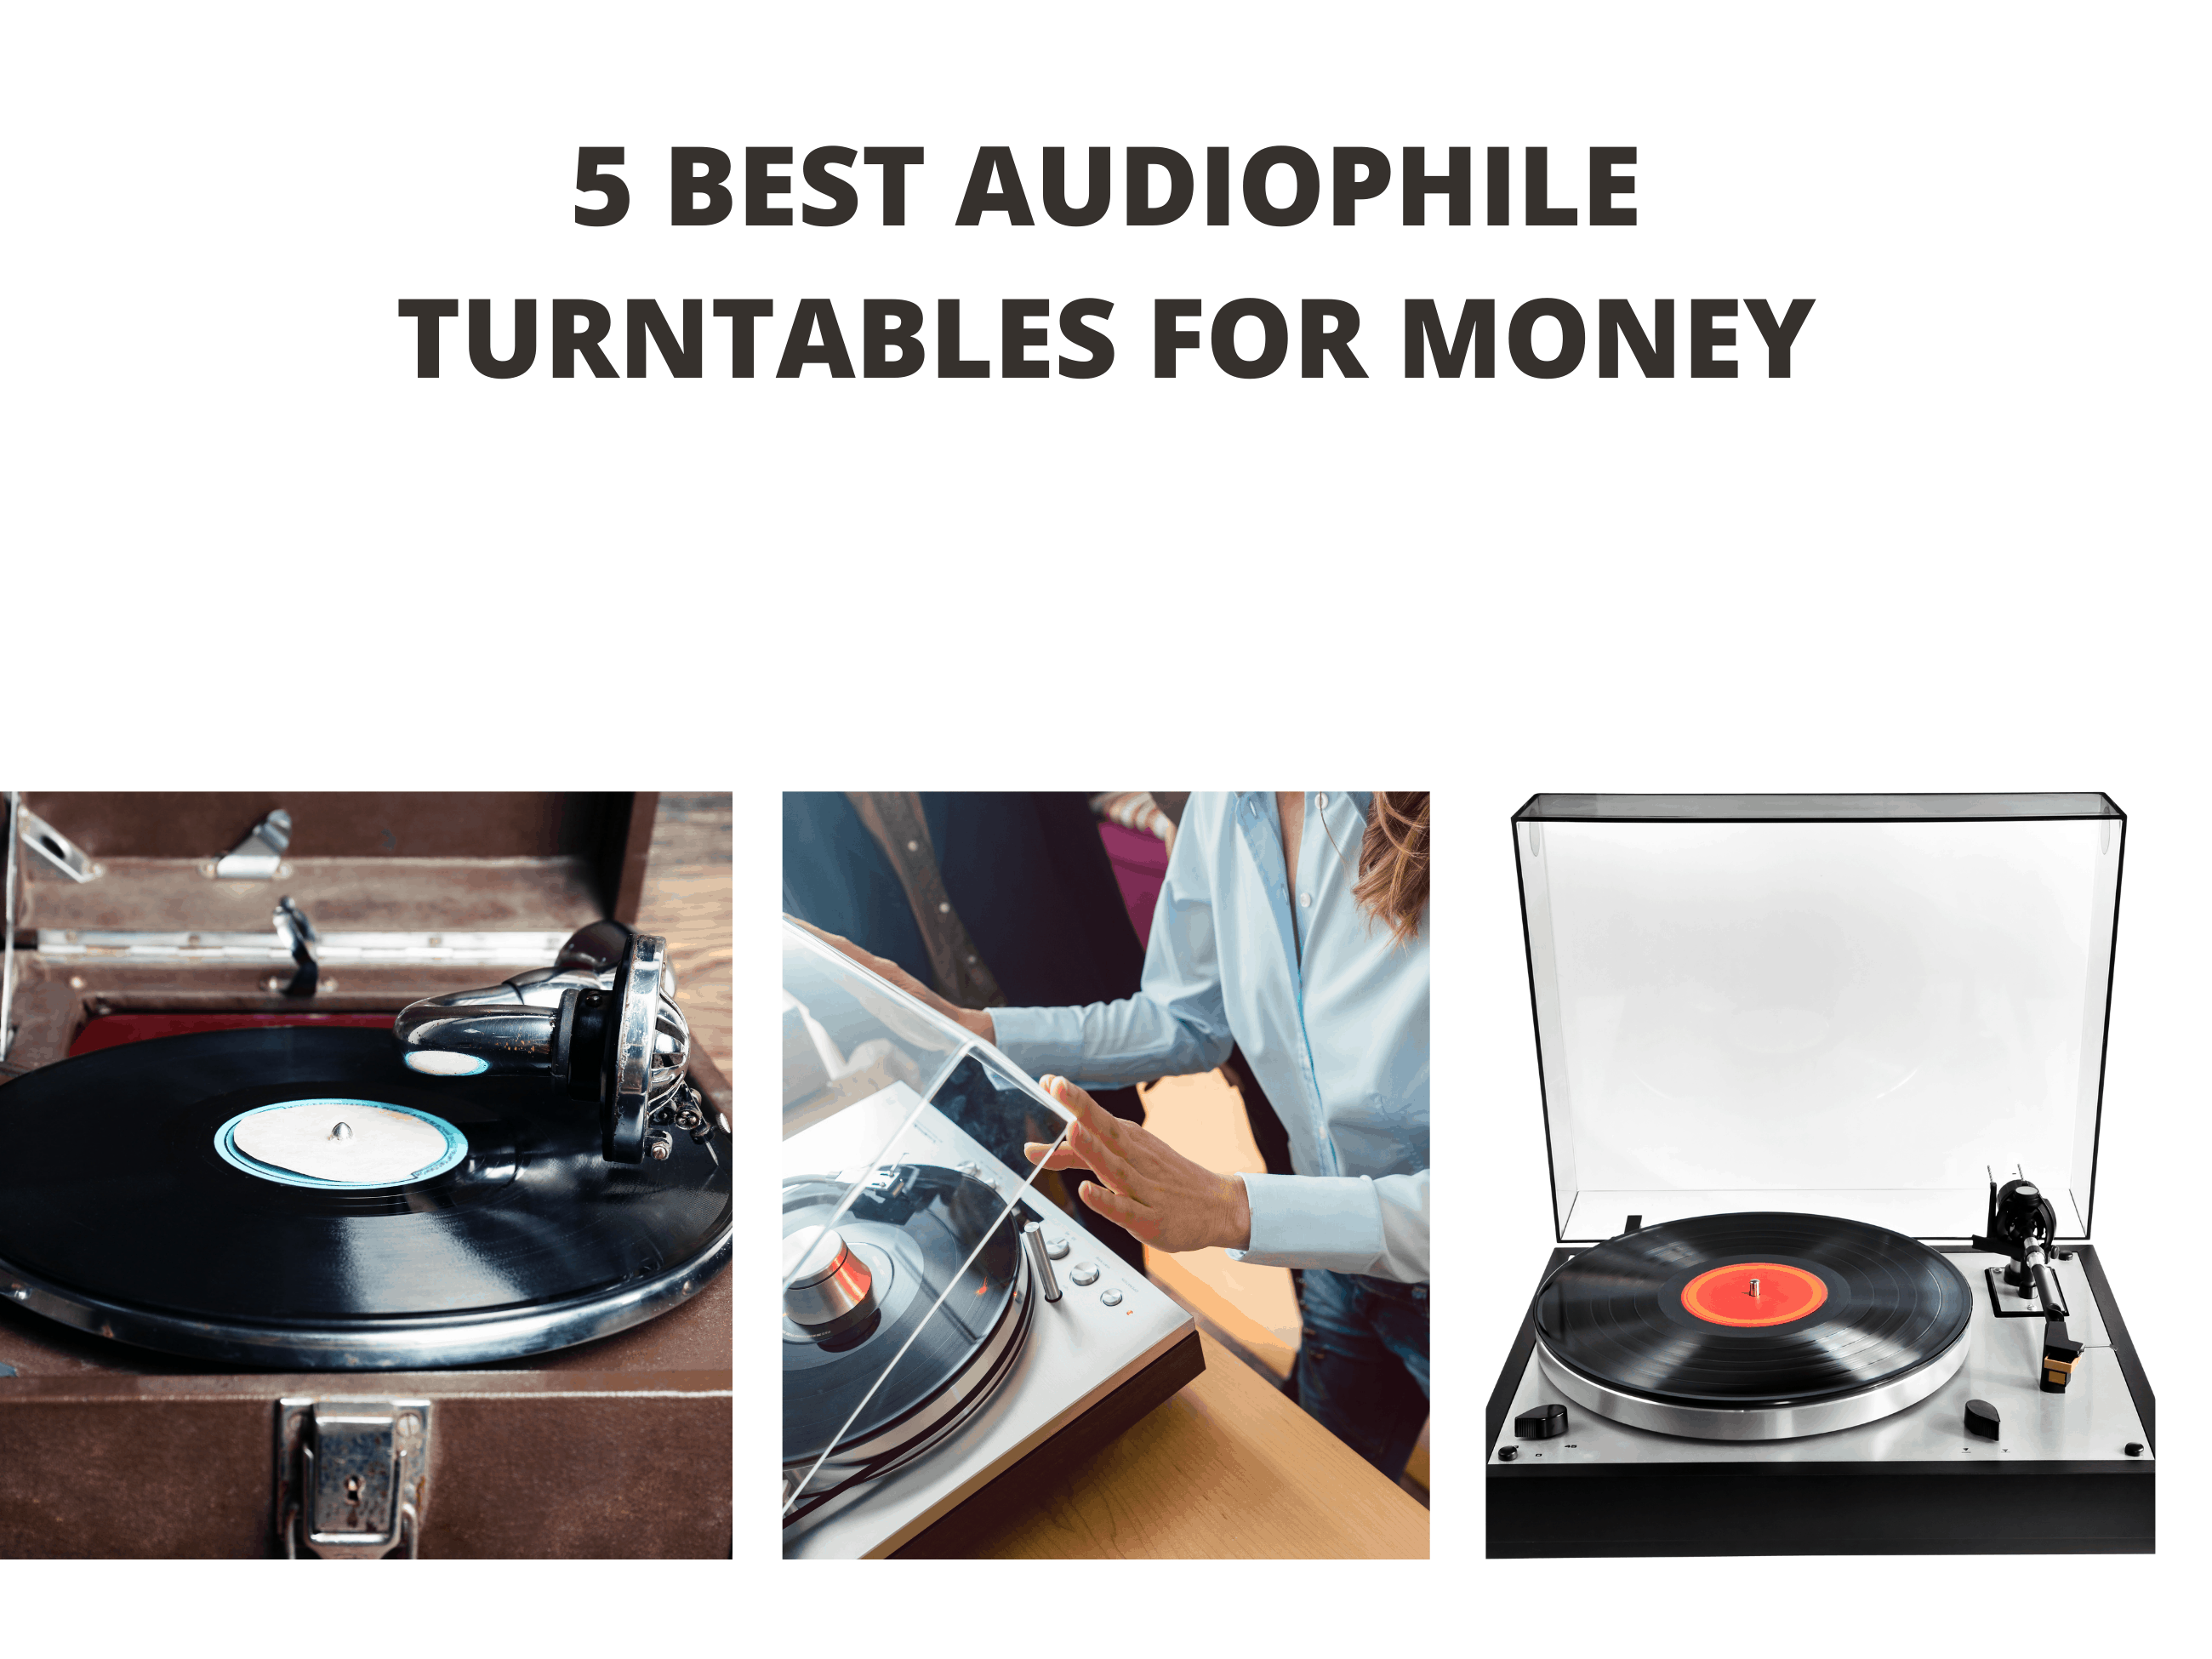 5 Best Audiophile Turntables for Money